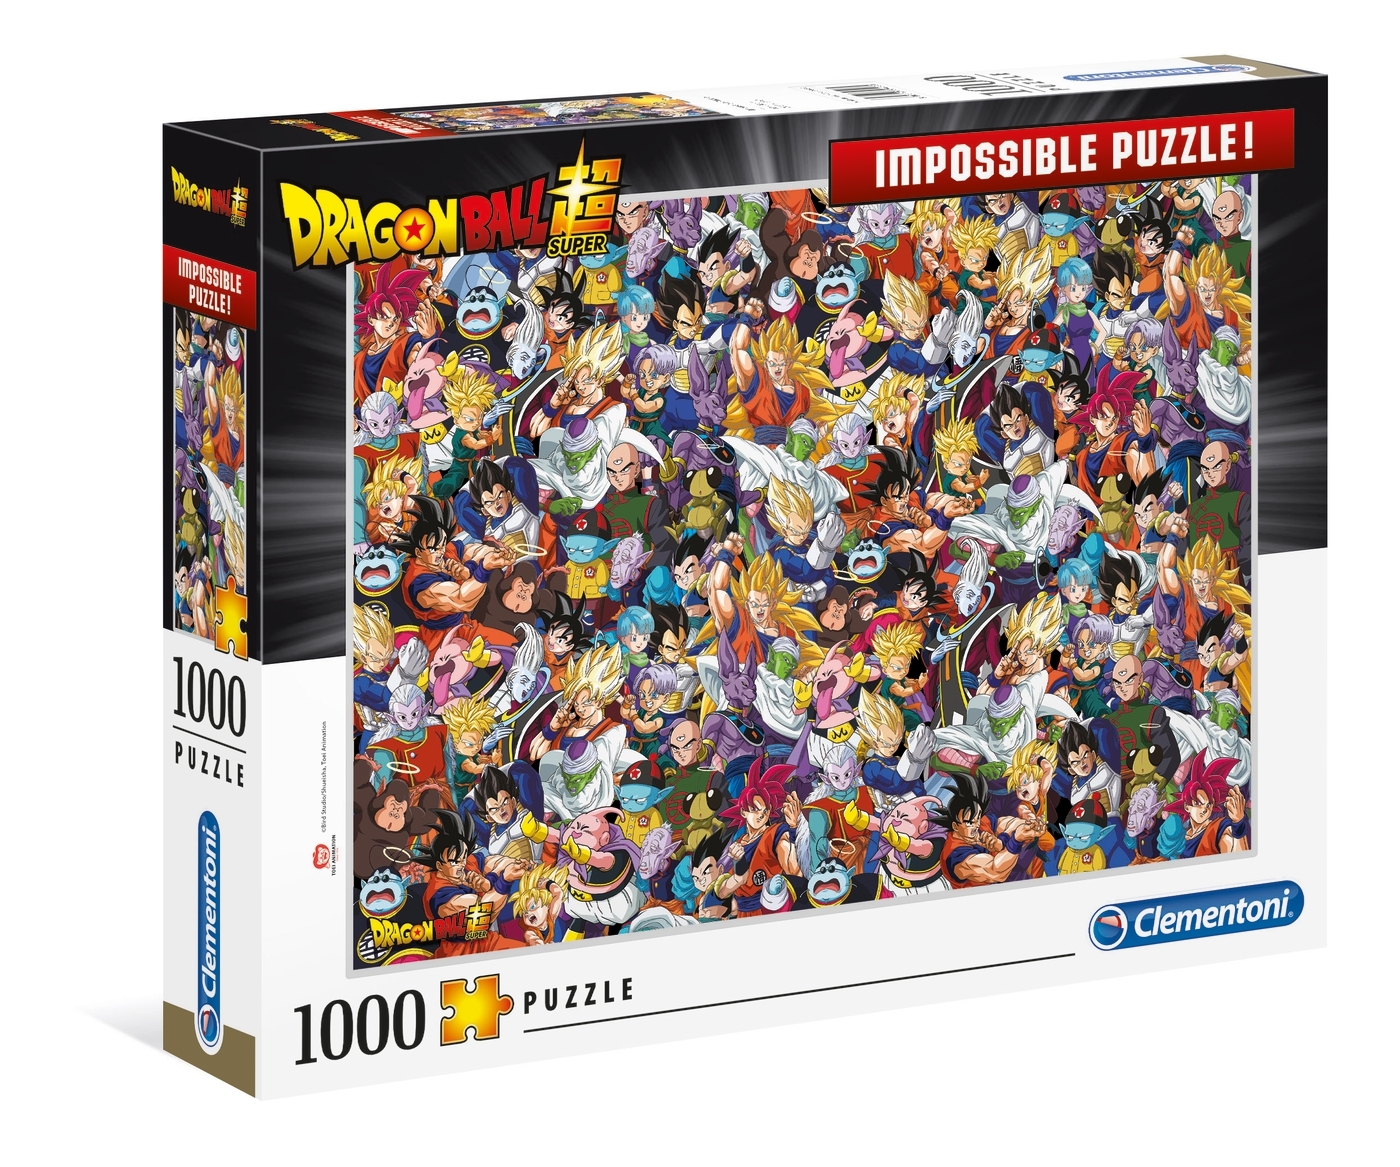 Puzzle Impossible Puzzle! 1000: Dragon Ball (39489)